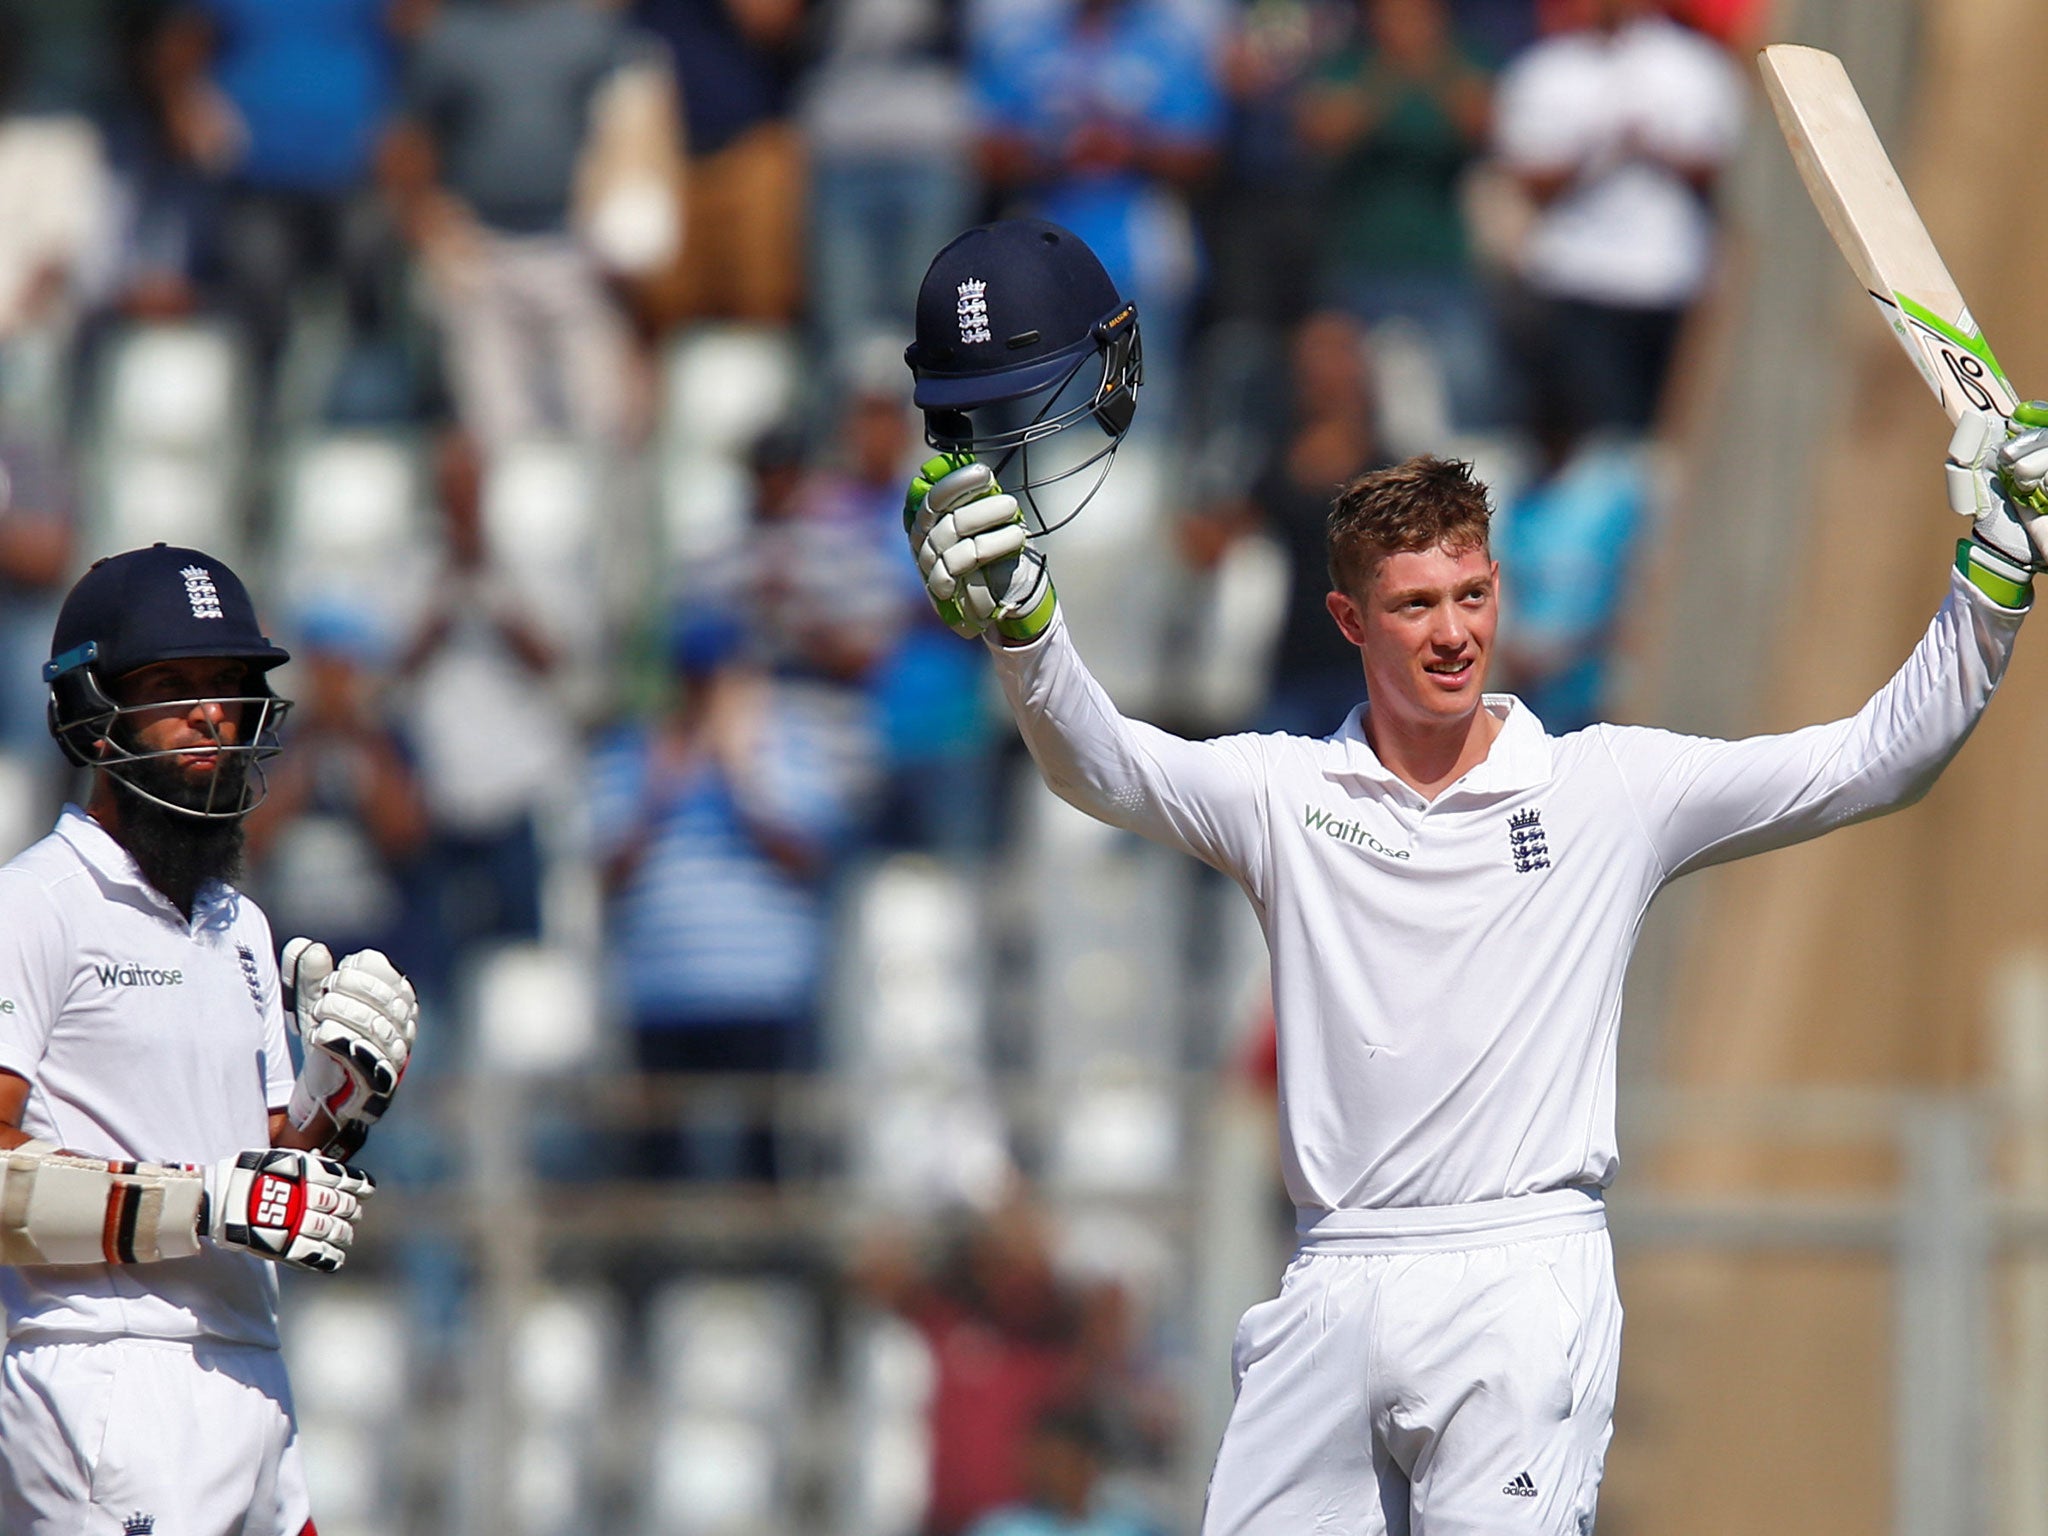 Keaton Jennings acknowledges the crowds after reaching his ton